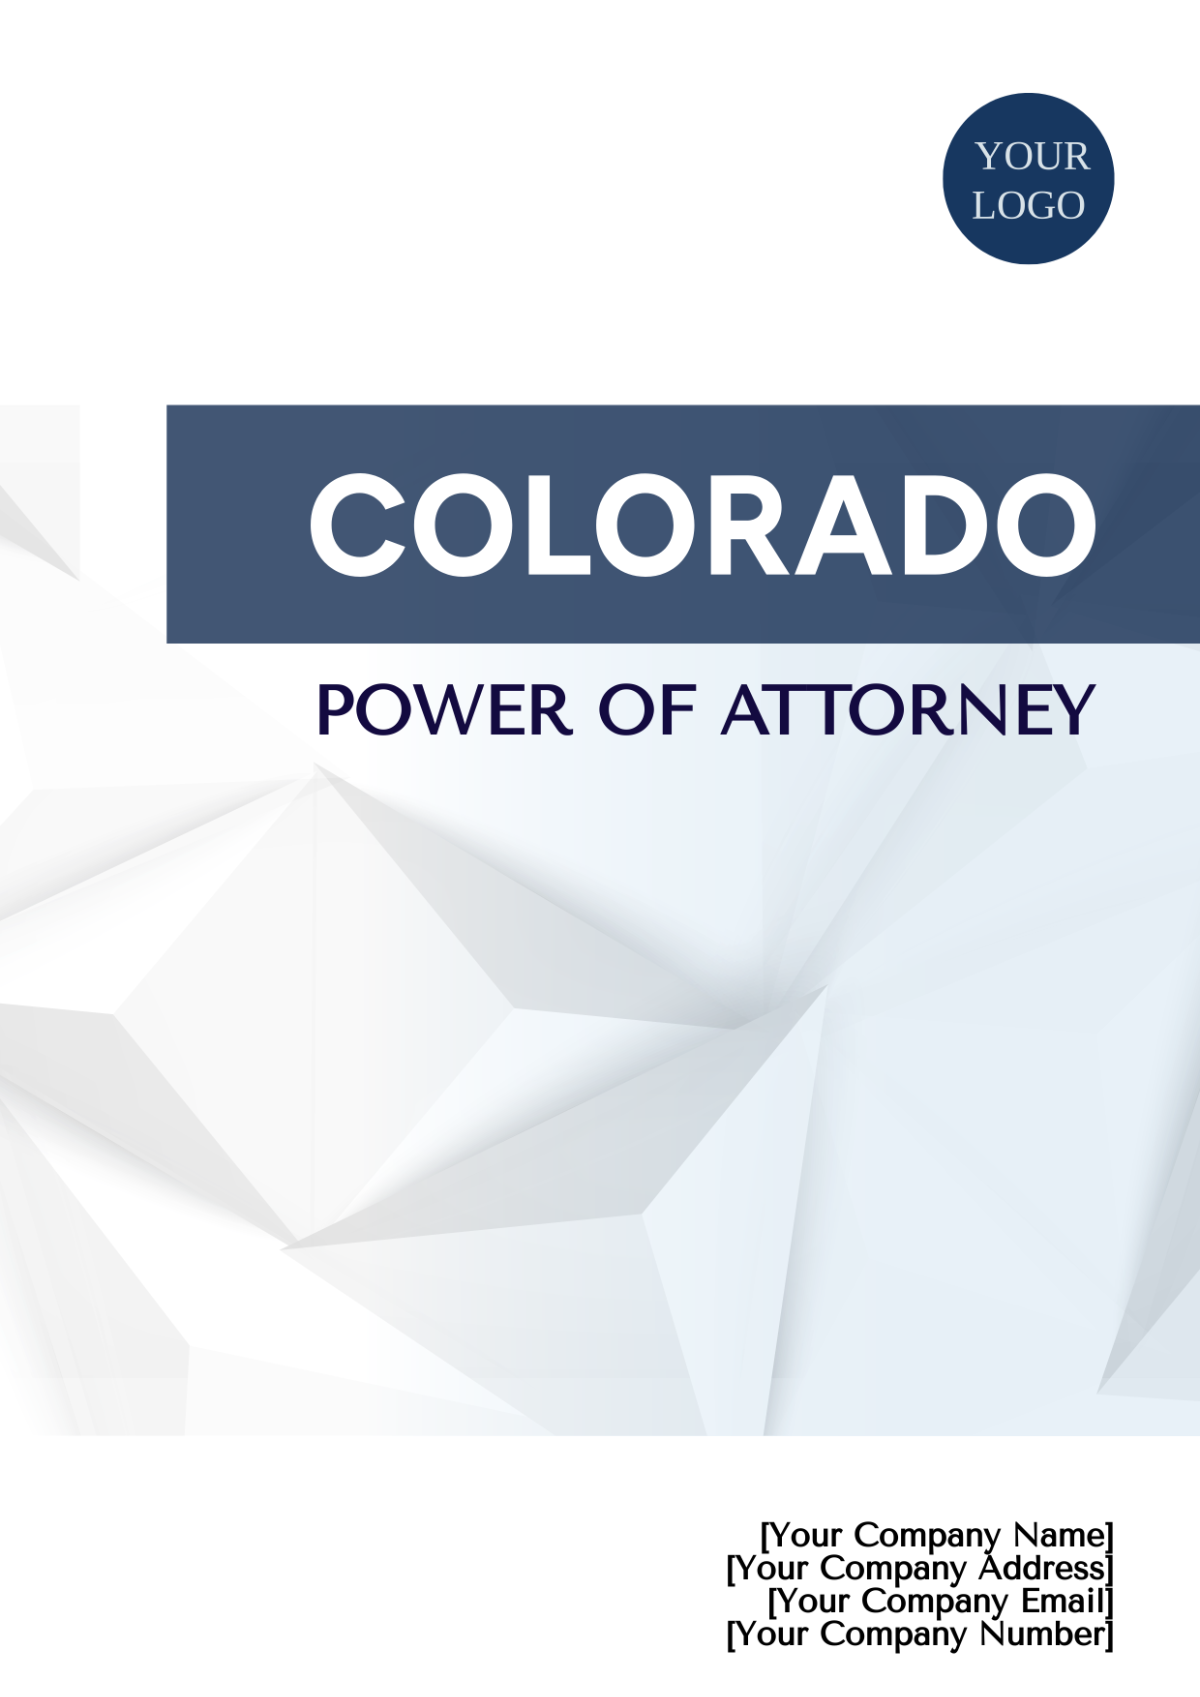 Colorado Power of Attorney Cover Page